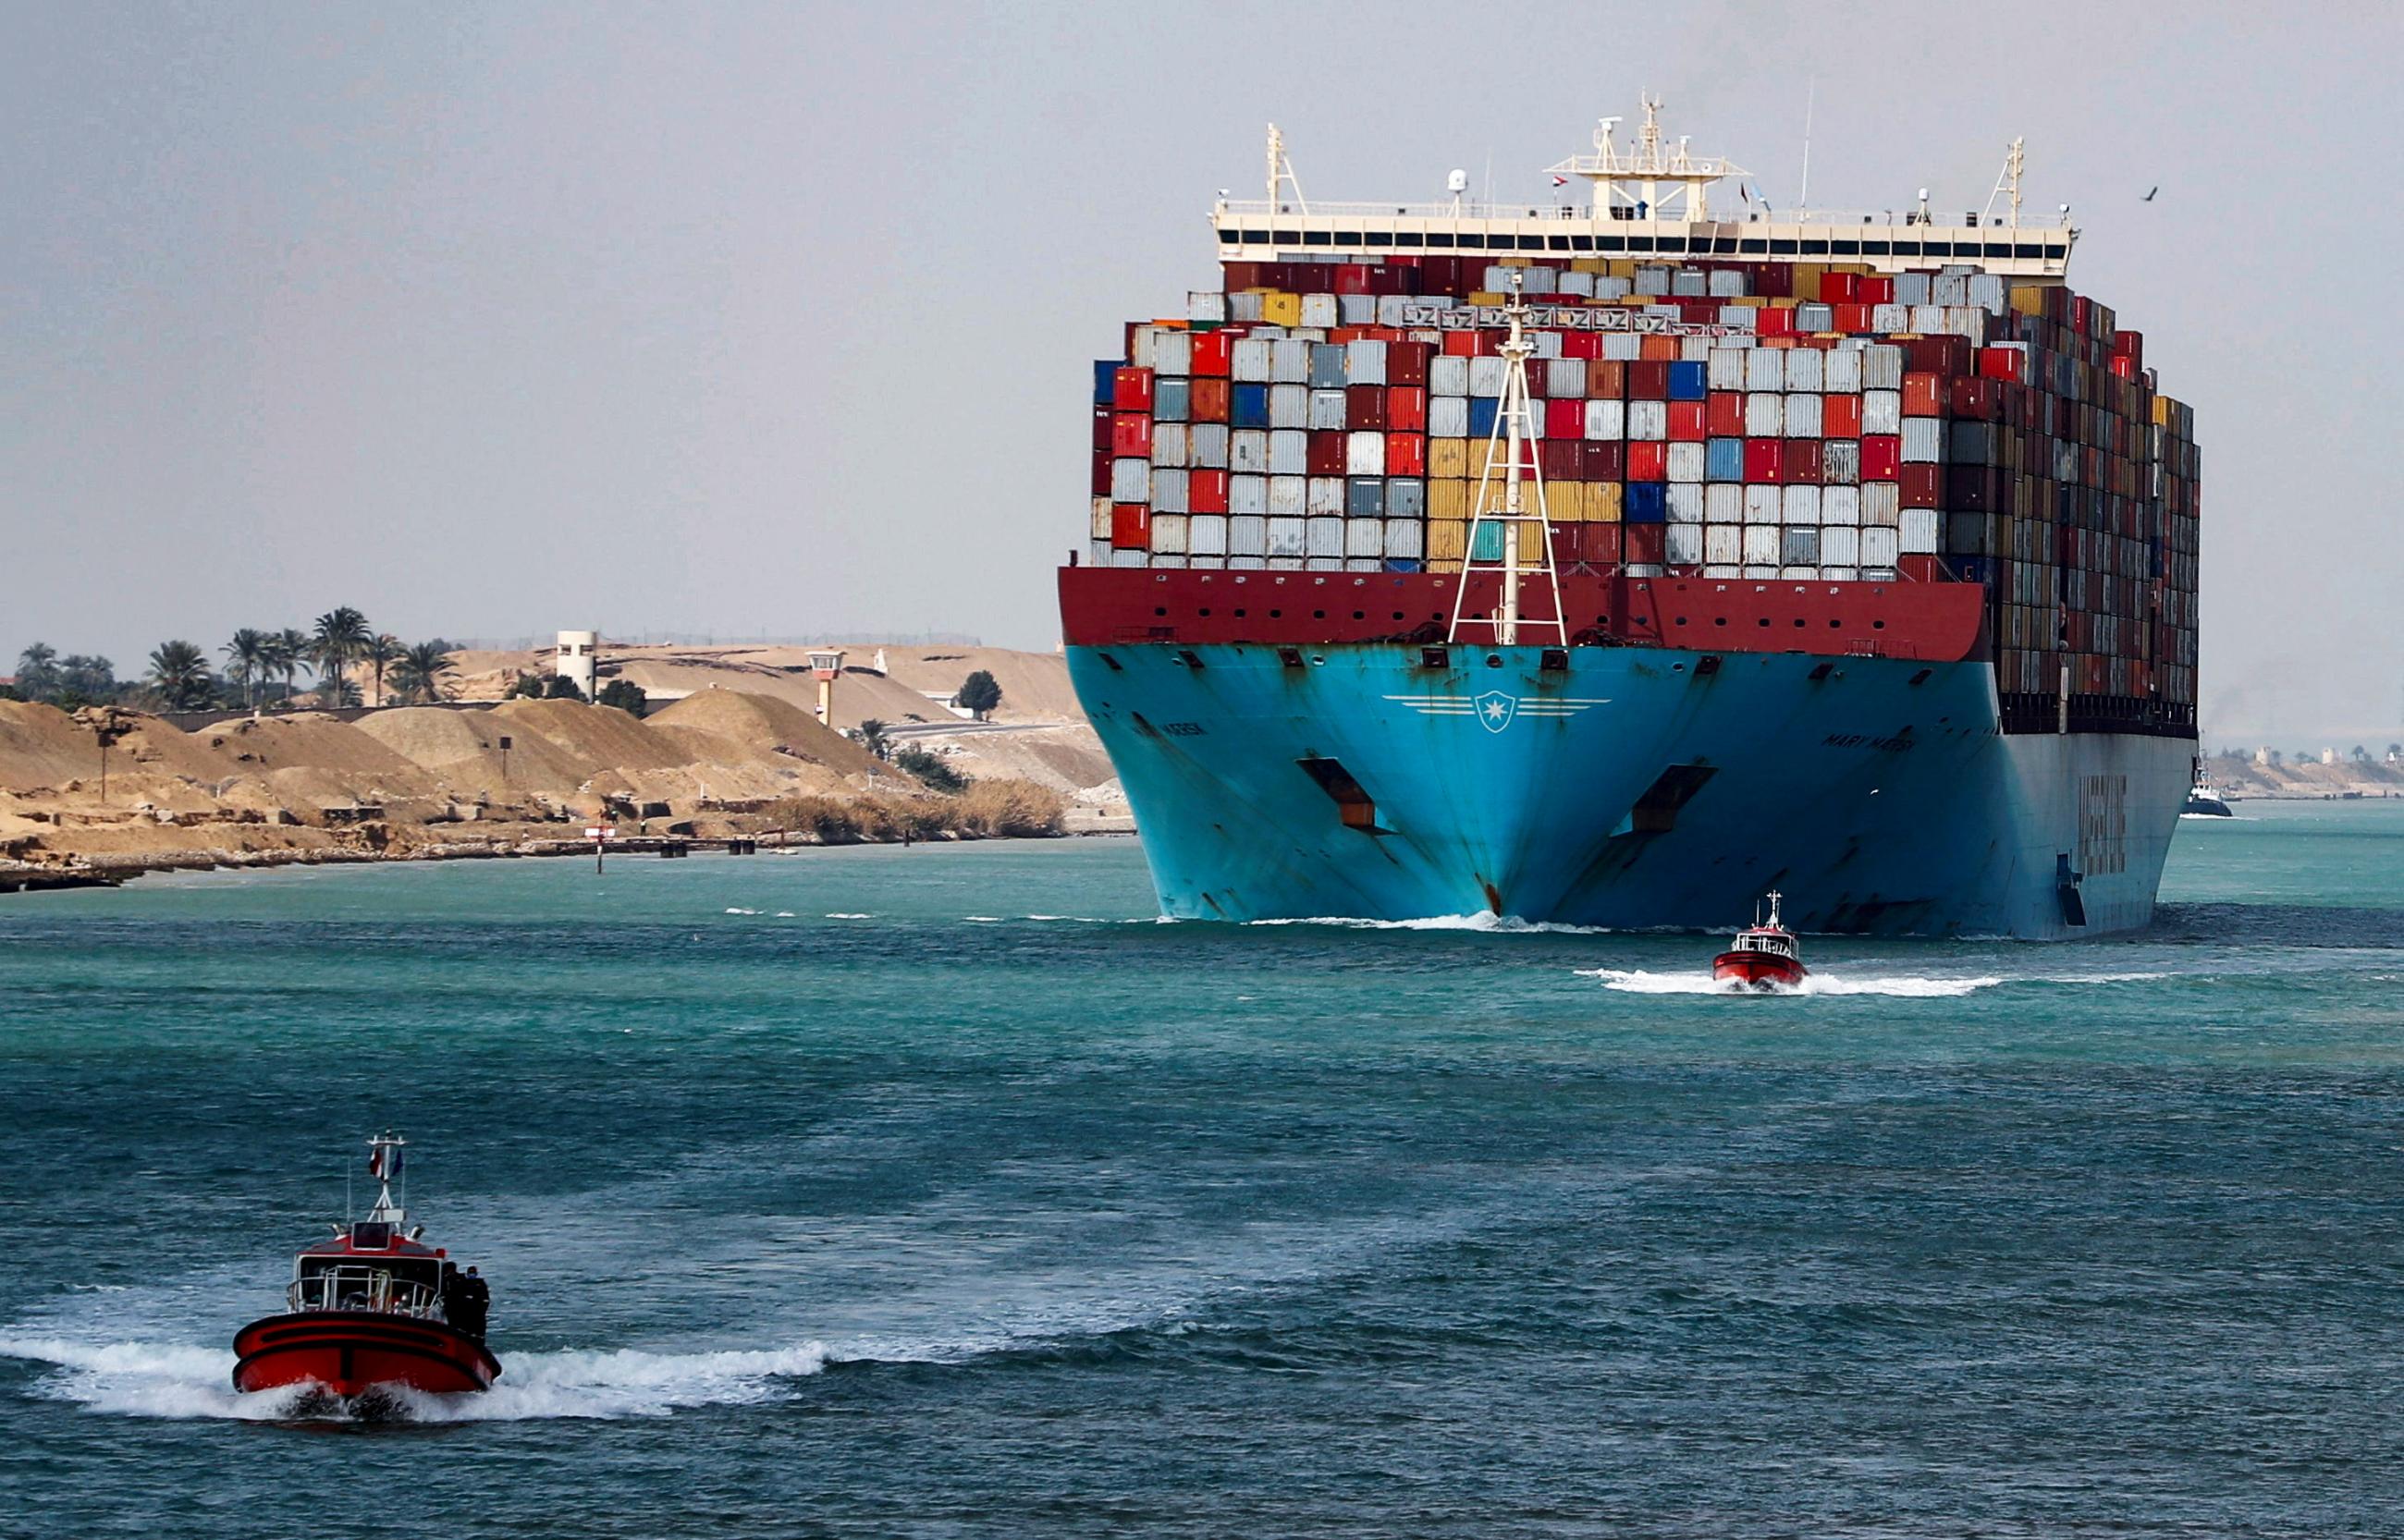 A ship piled with shipping containers passes through the Suez Canal in Suez, Egypt